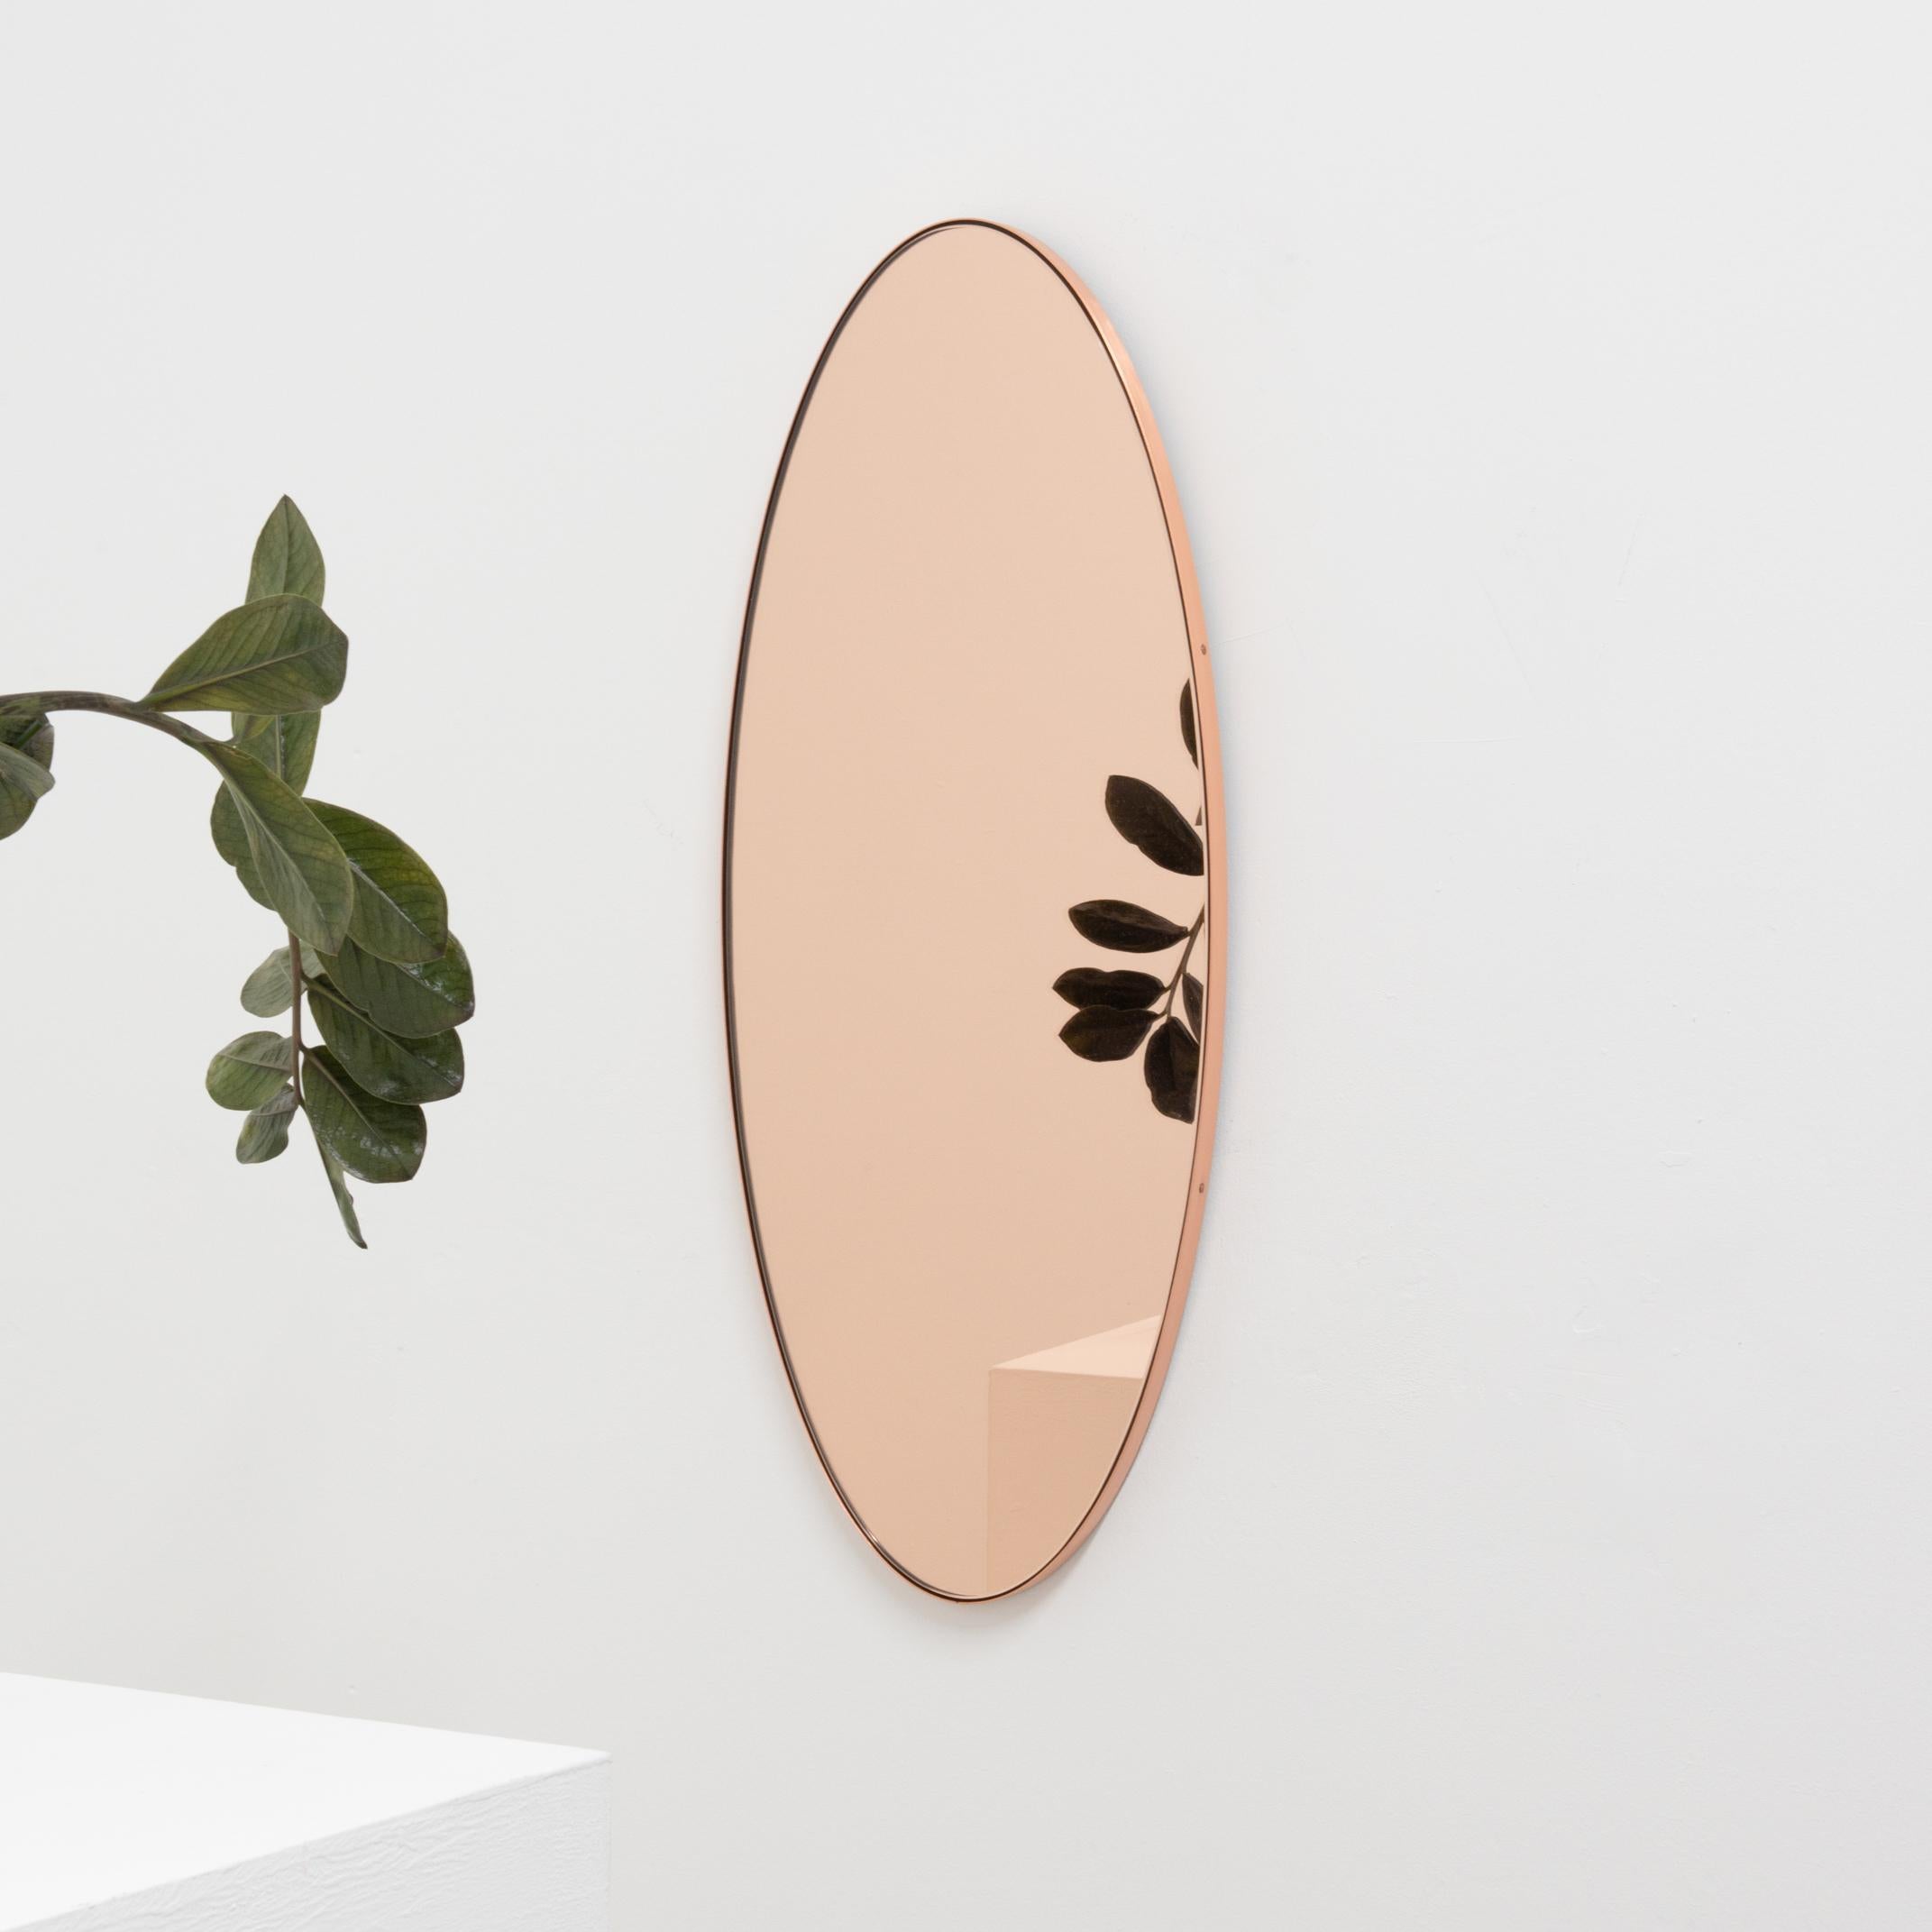 Ovalis Oval shaped Modern Rose Gold Mirror with a Copper Frame, XL For Sale 1